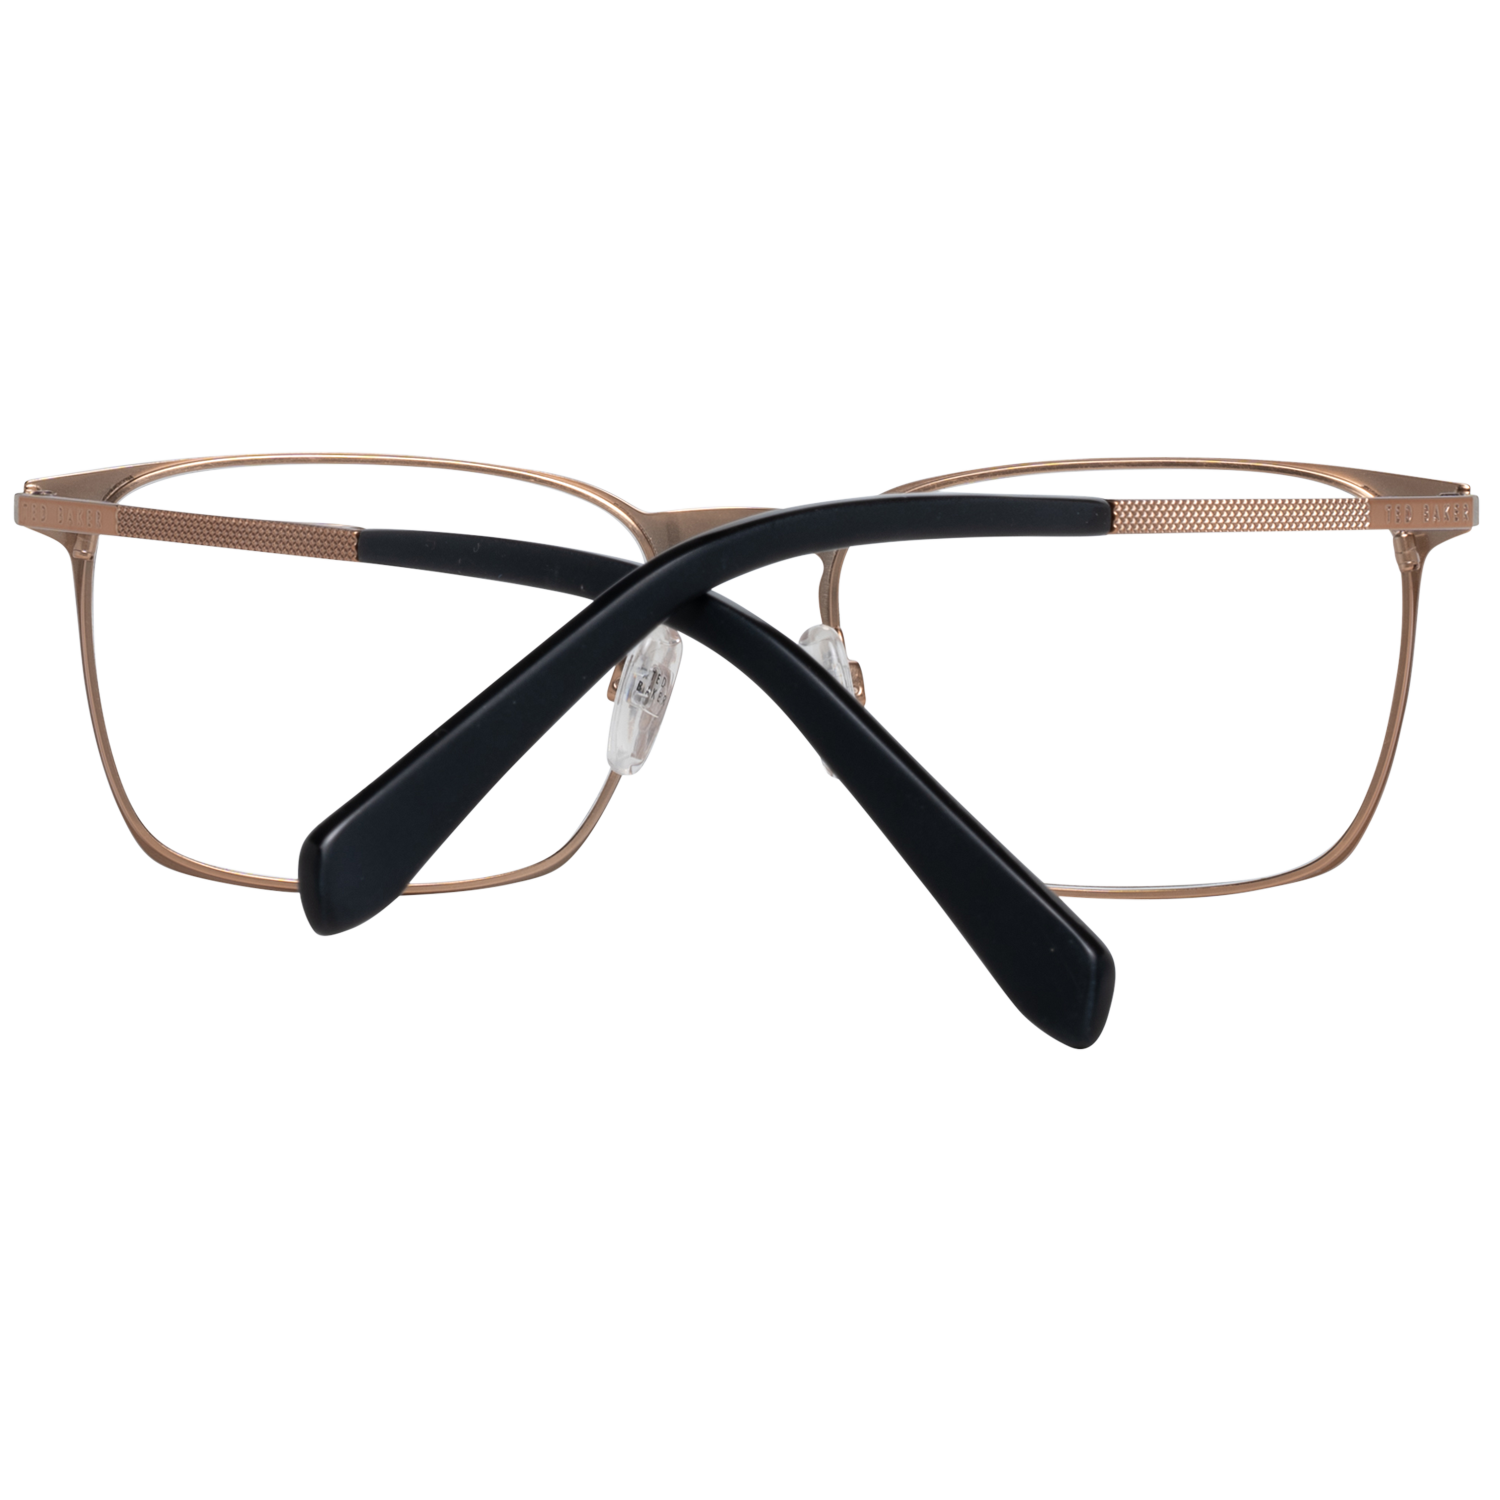 GenderMenMain colorBlackFrame colorBlackFrame materialMetalSize53-17-145Lenses width53mmLenses heigth40mmBridge length17mmFrame width135mmTemple length145mmShipment includesCase, Cleaning clothStyleFull-RimSpring hingeYes